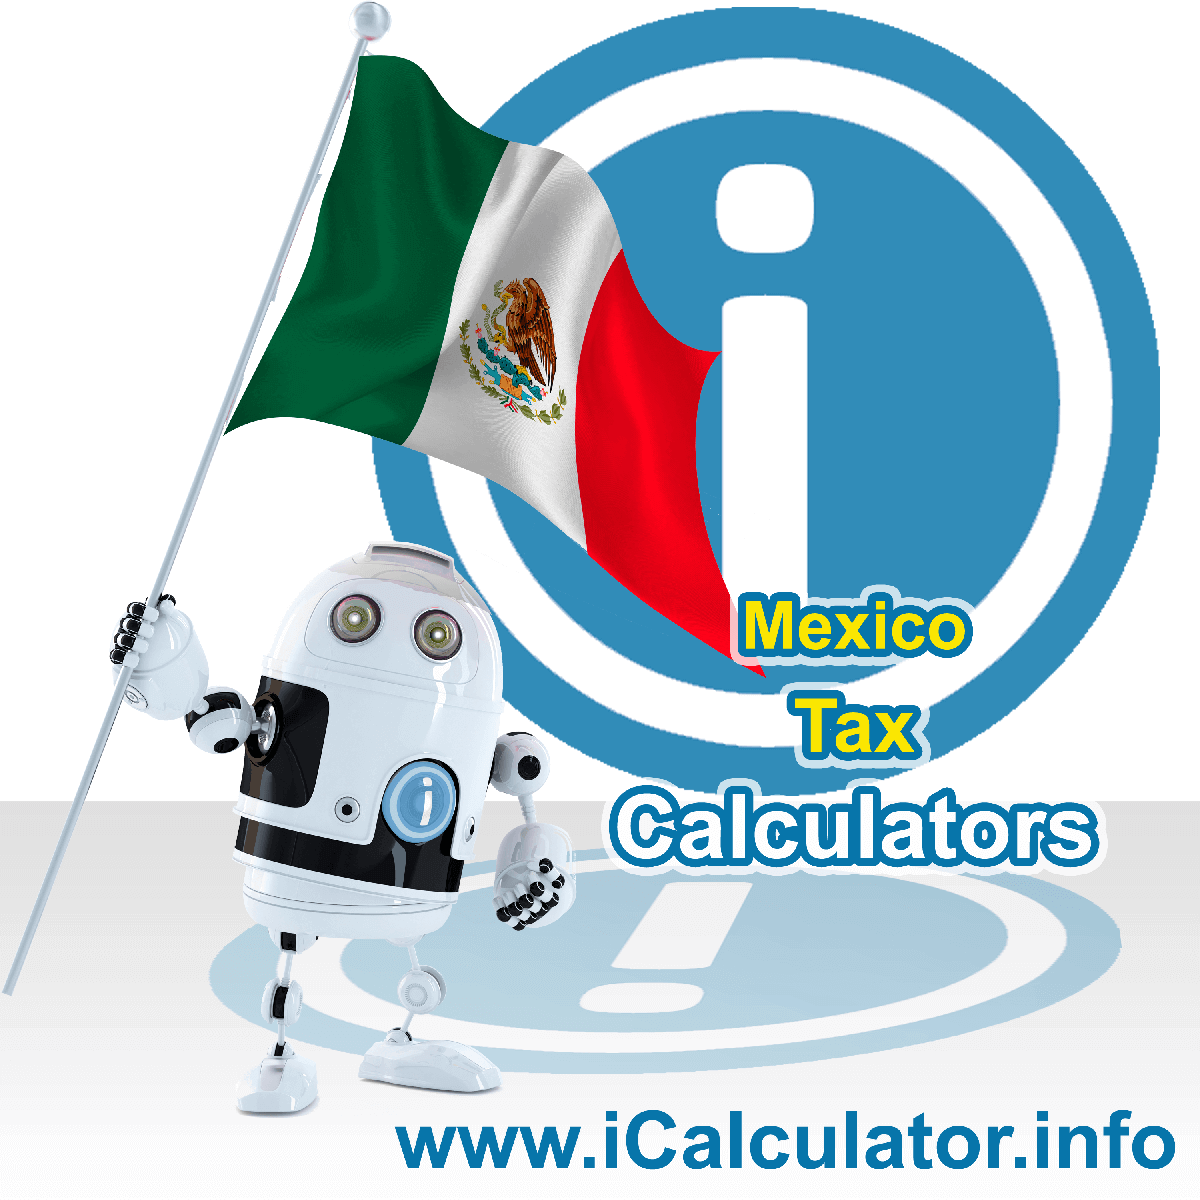 Mexico Tax Calculator. This image shows the Mexicoese flag and information relating to the tax formula for the Mexico Tax Calculator